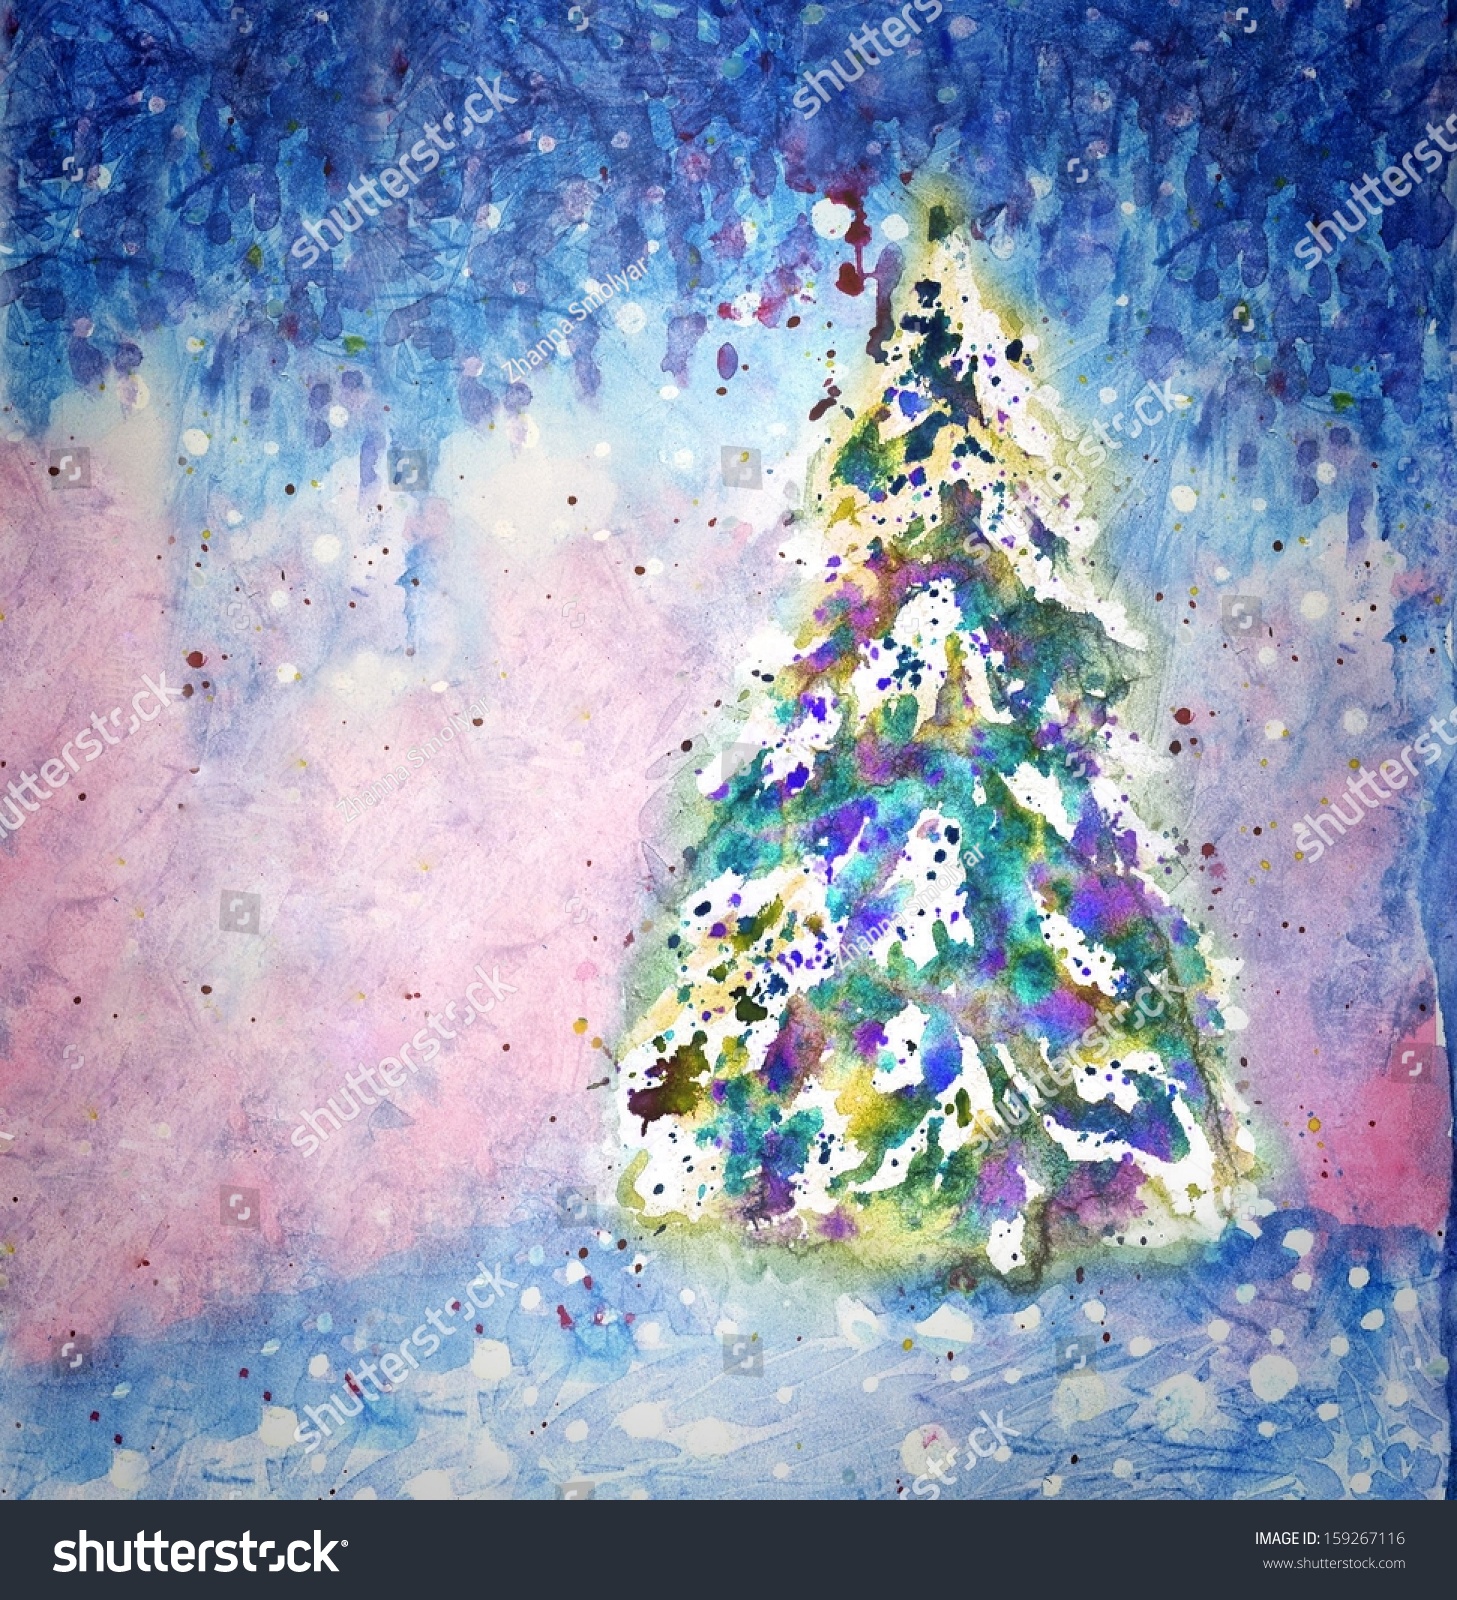 Christmas Tree Watercolor Painting. Stock Photo 159267116 : Shutterstock